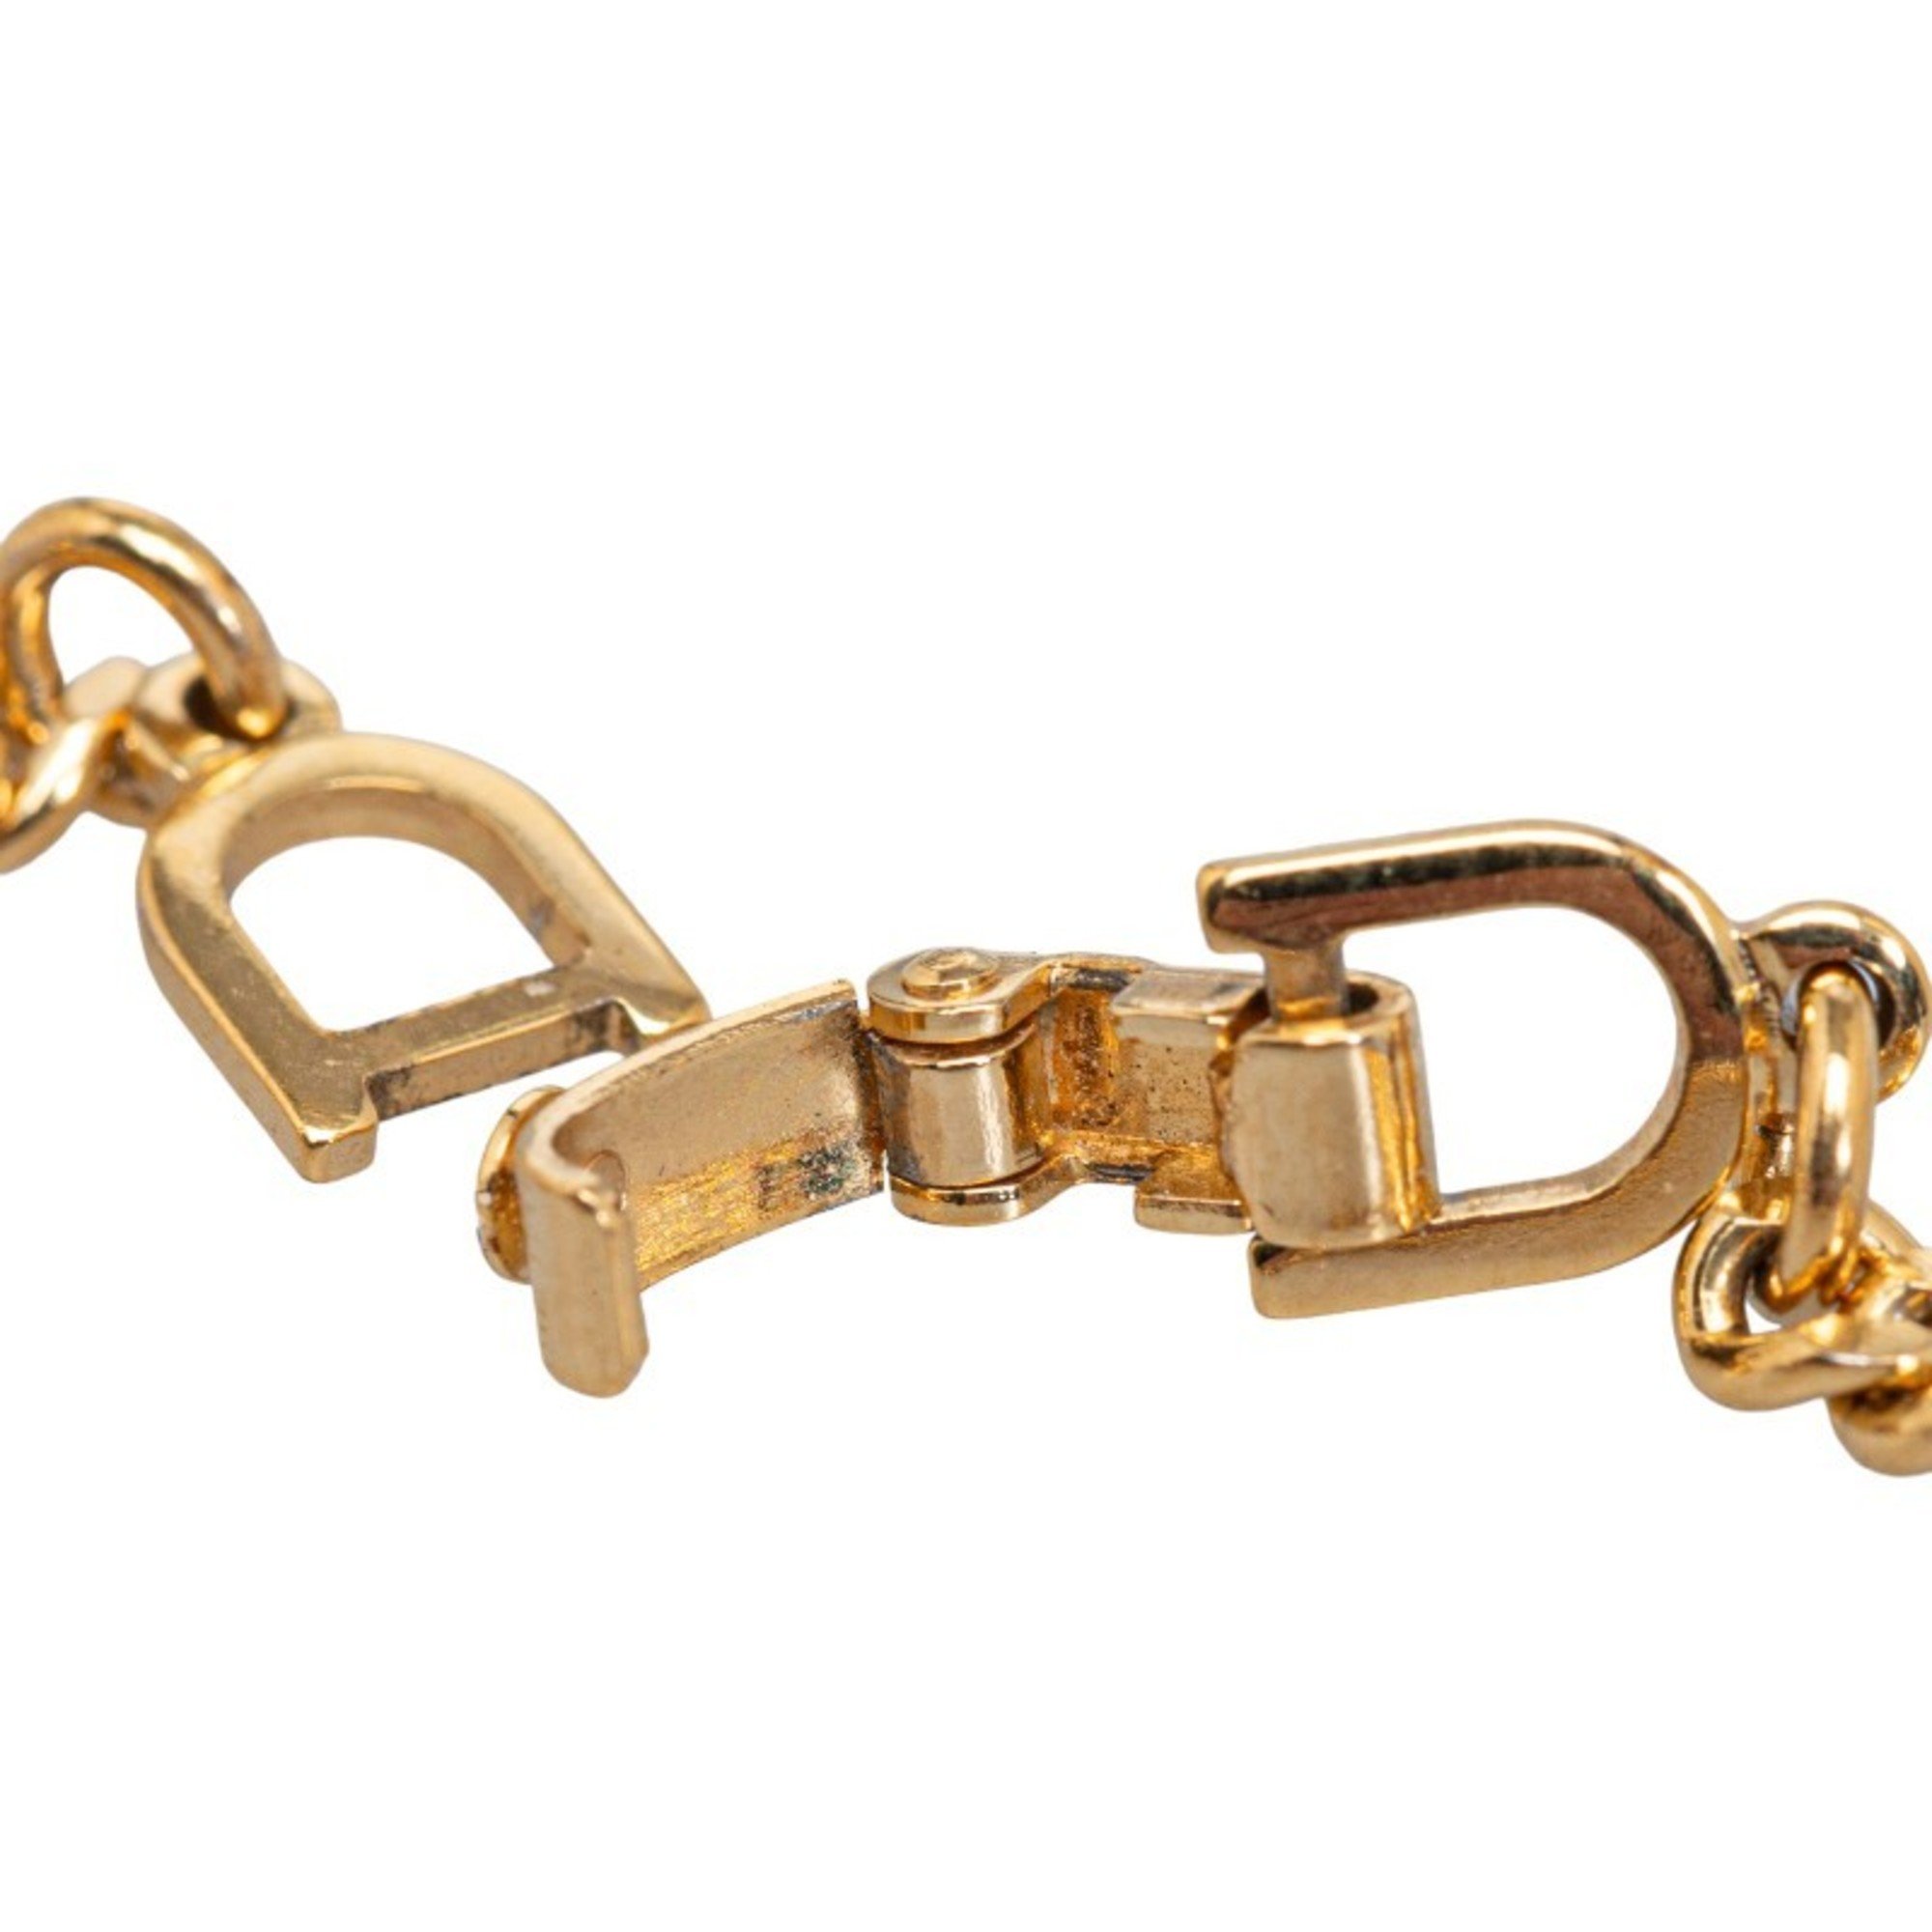 Christian Dior Dior chain bracelet gold plated ladies